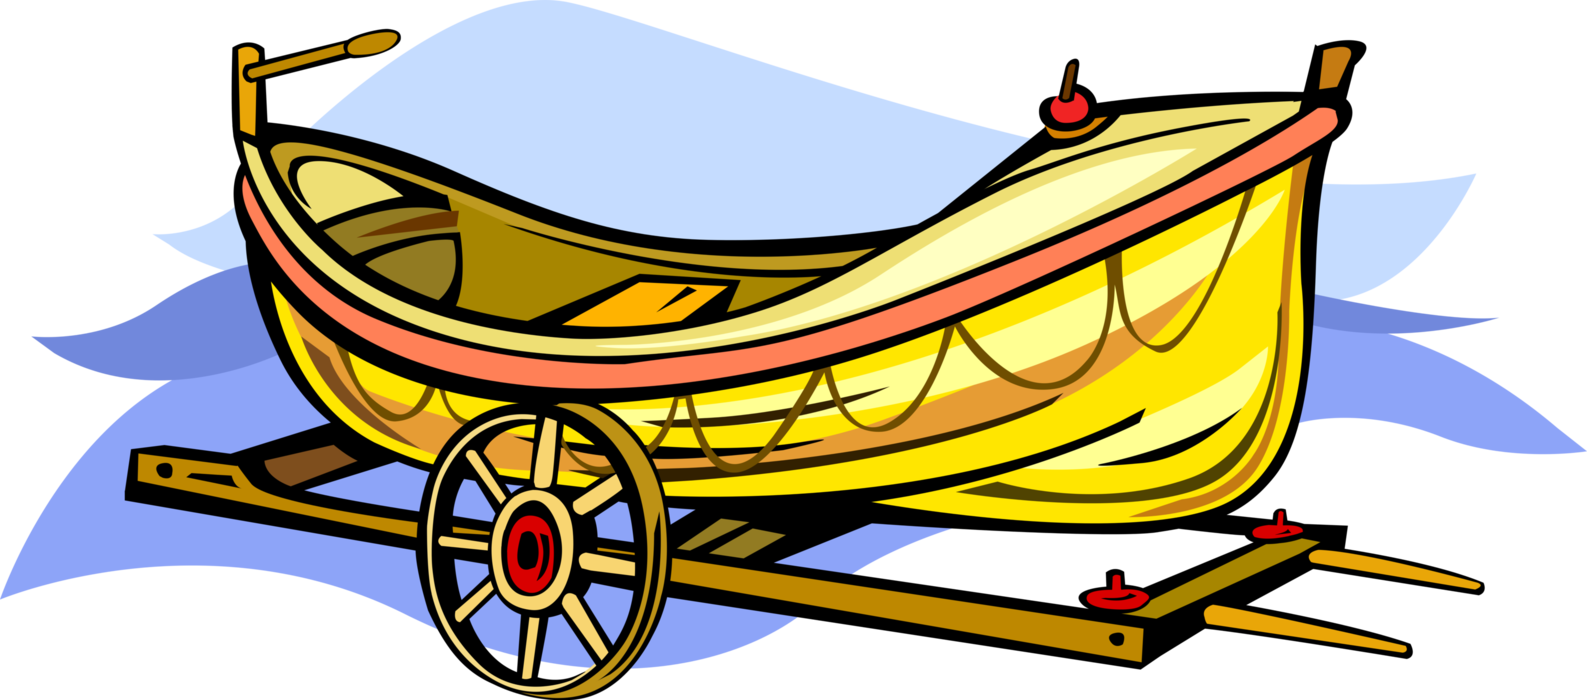 Vector Illustration of Dory Traditional Fishing Boat on Trailer with Wheels